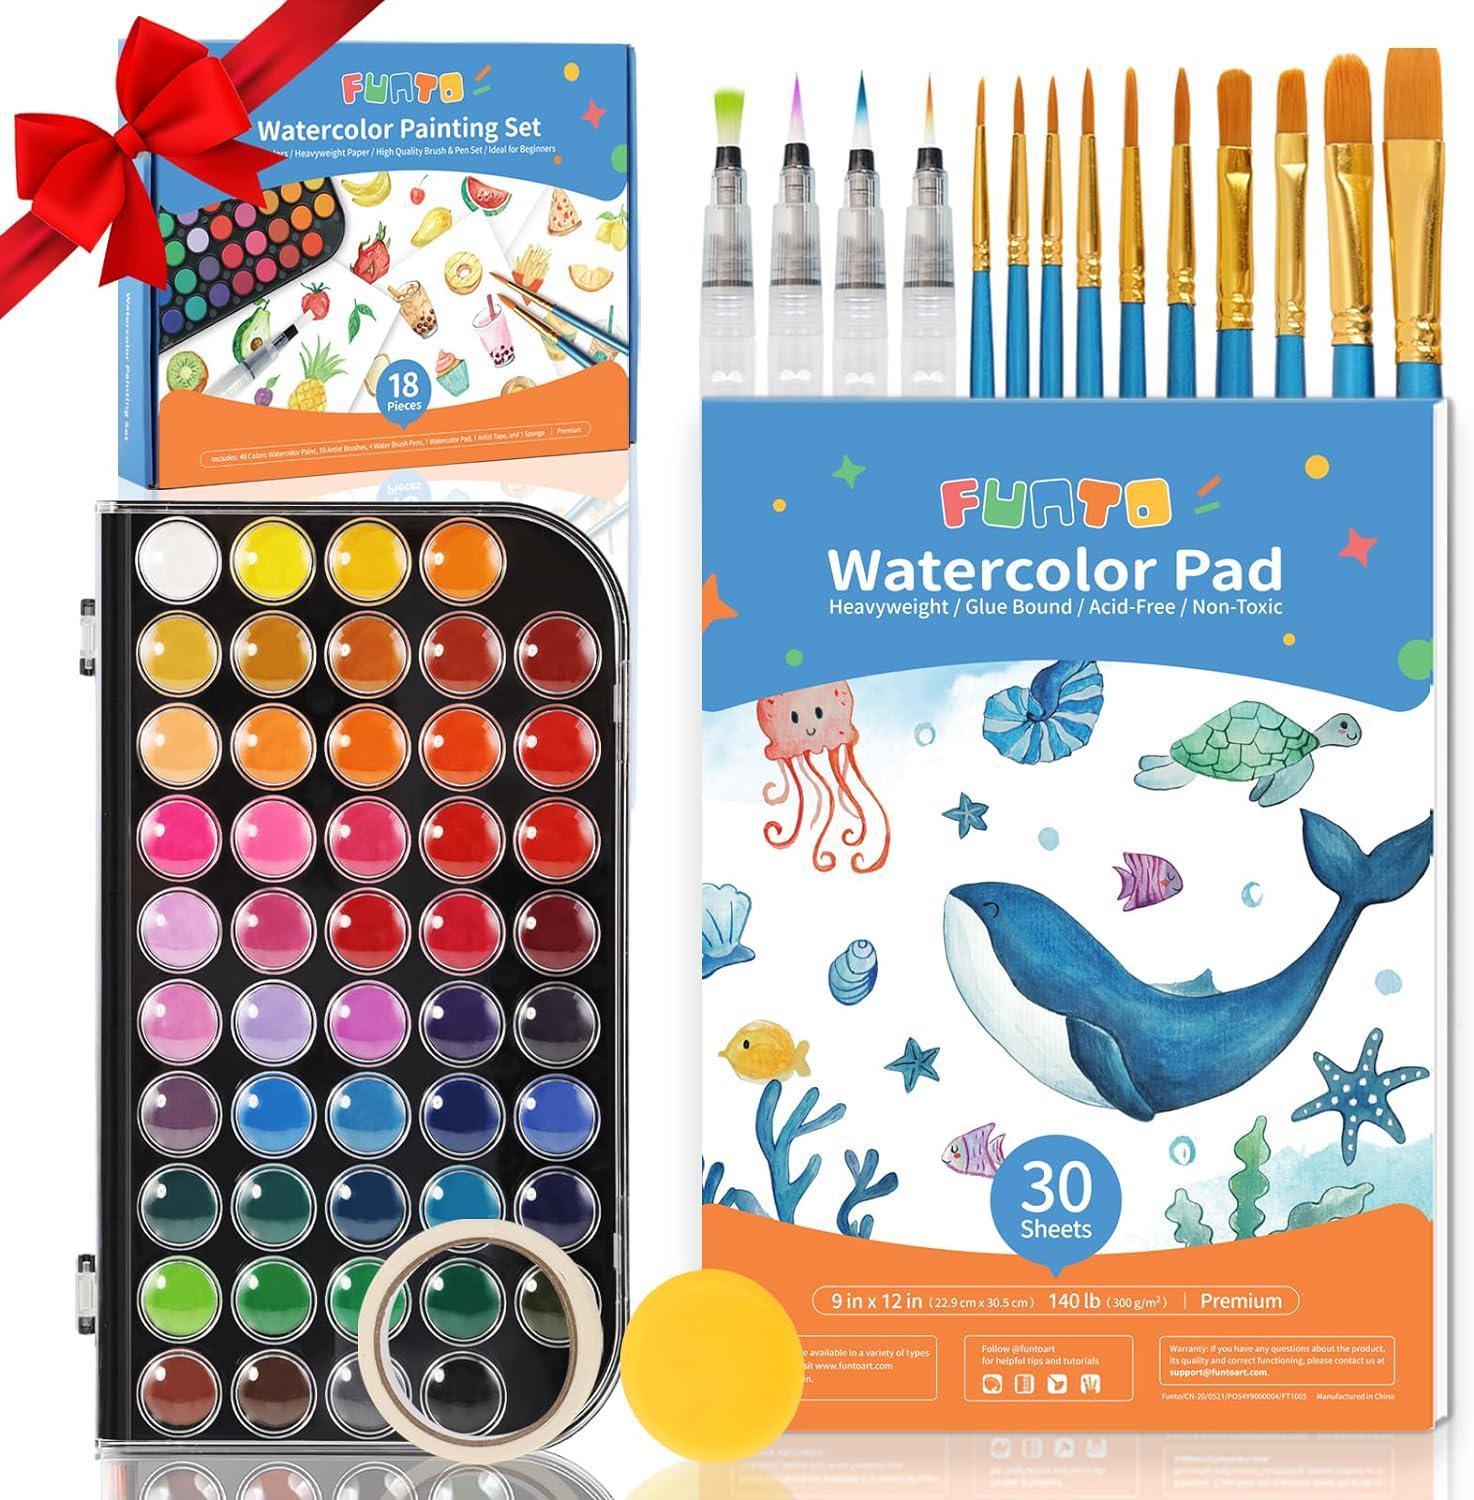 TBC The Best Crafts 16 Colors Watercolor Paint Set with 3 Bonus Brushes Non-Toxic for Student & Kids